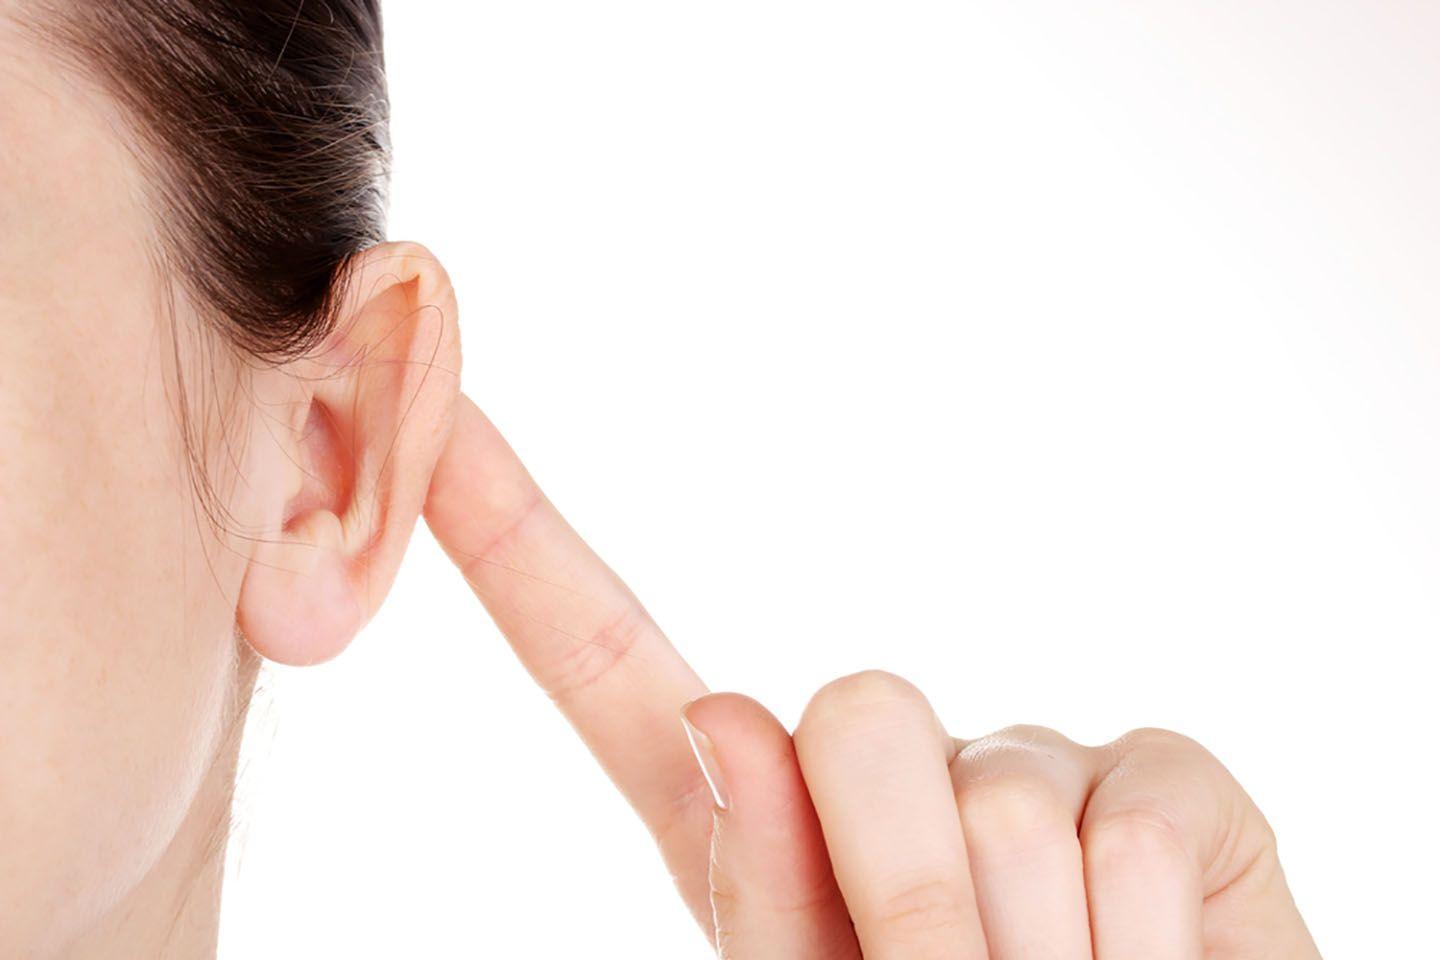 A woman pushes her ear forward with her finger